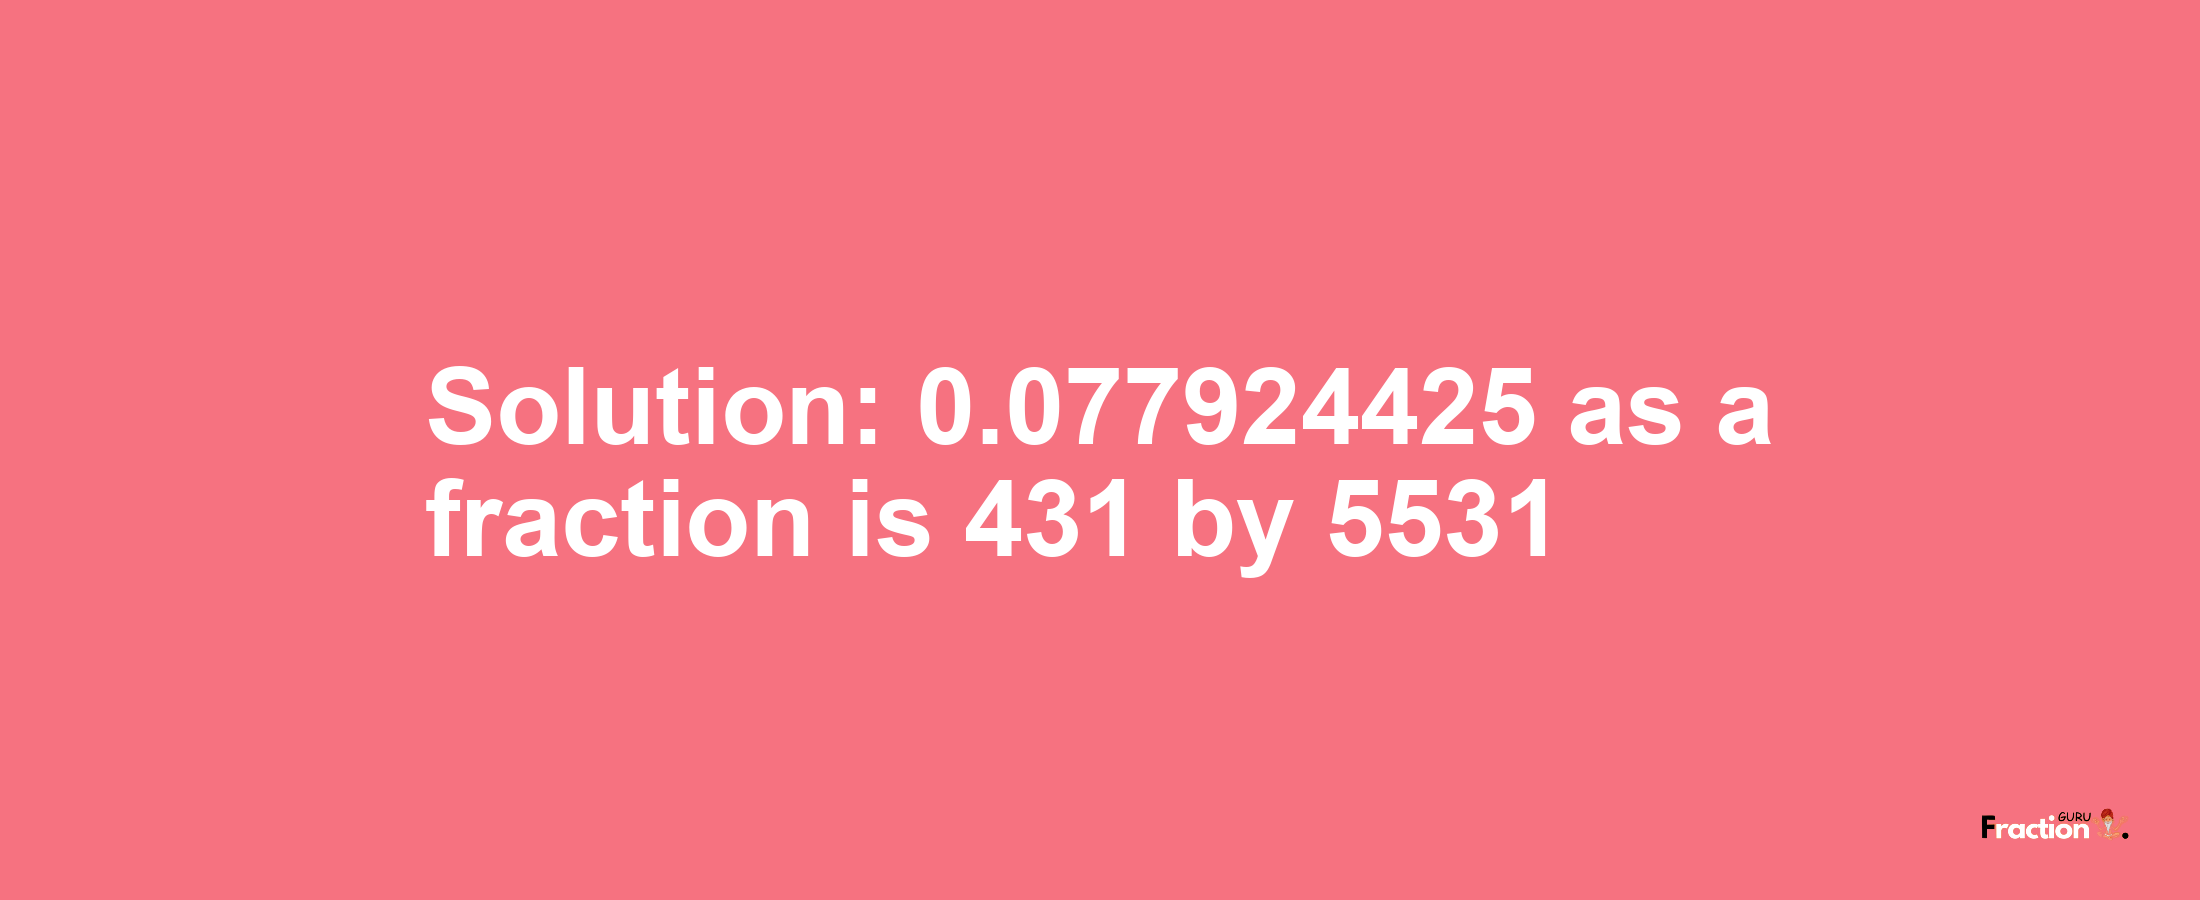 Solution:0.077924425 as a fraction is 431/5531